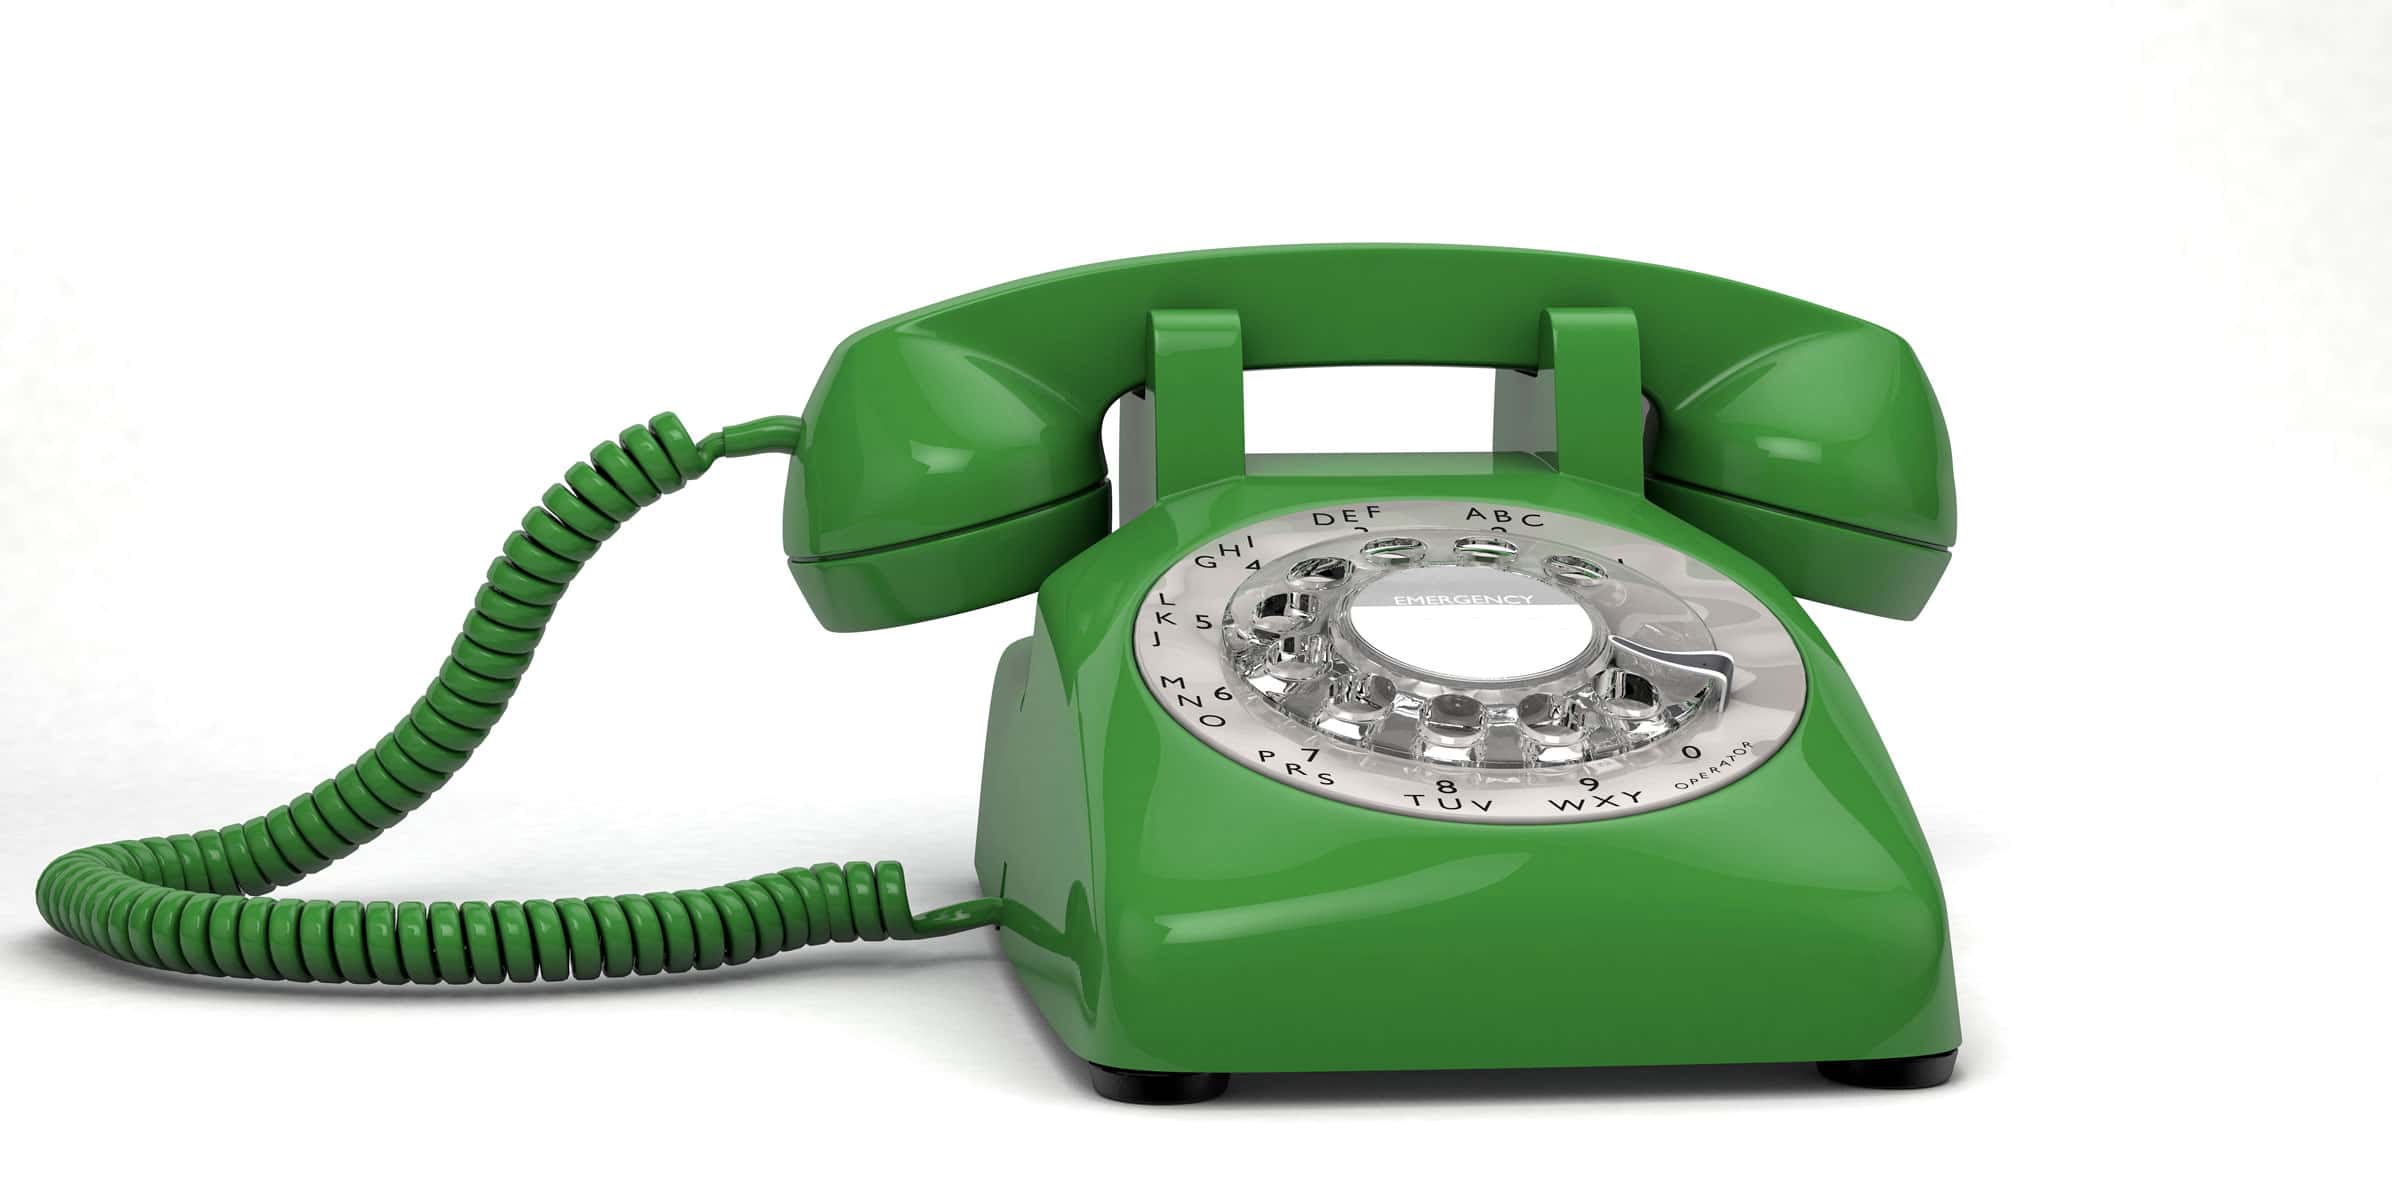 Rotary Phone, Backgrounds, Business, Business Finance and Industry, Digitally Generated Image, Horizontal